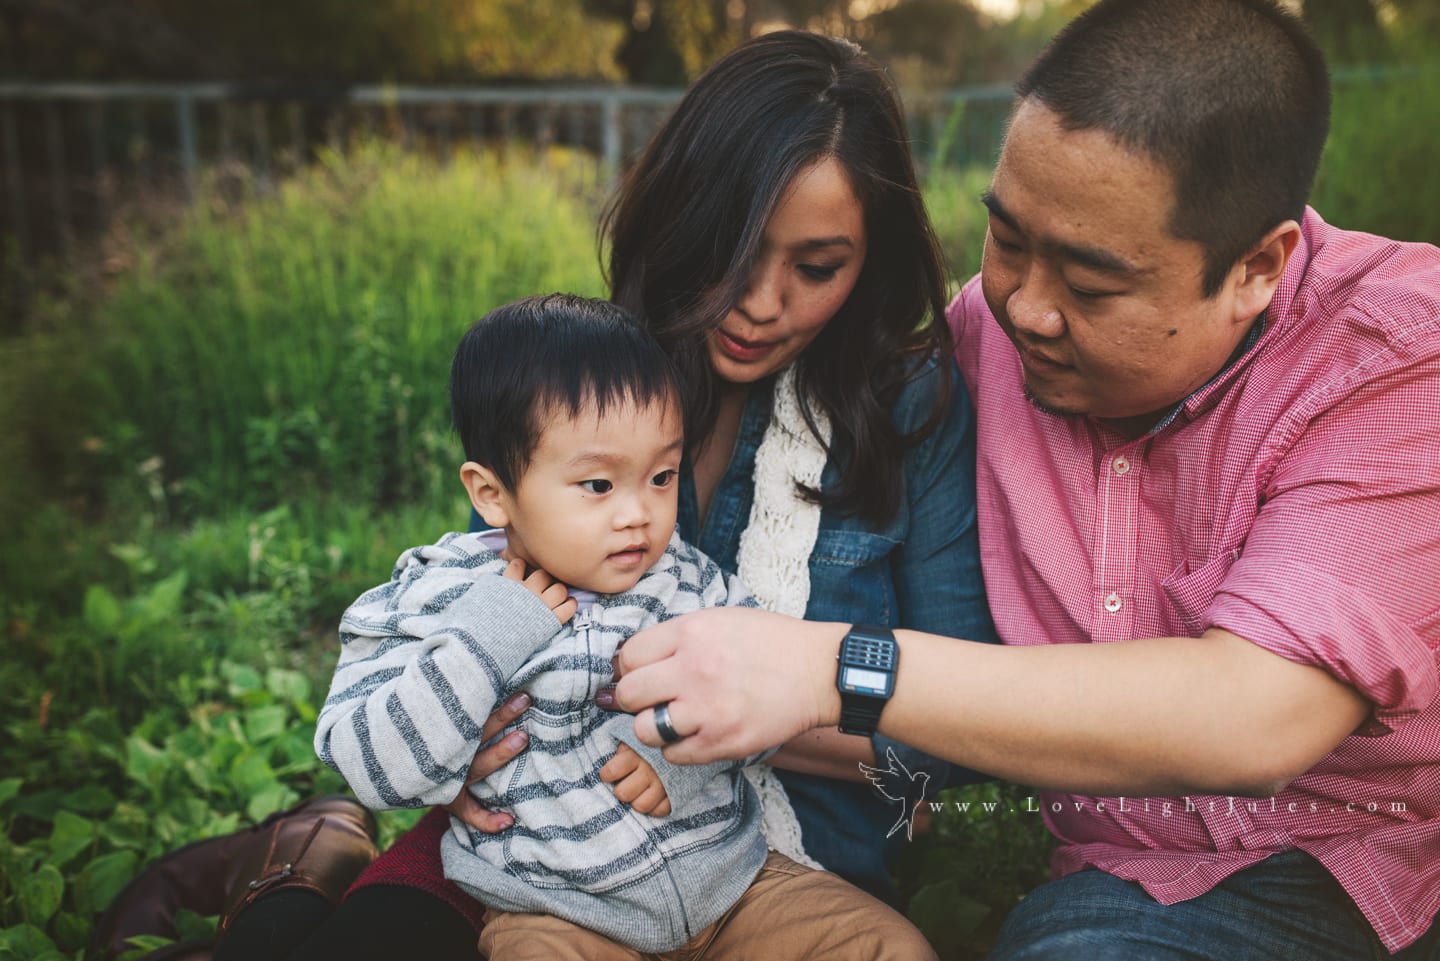 mom-dad-and-child-photo-in-grass-by-sacramento-photographer